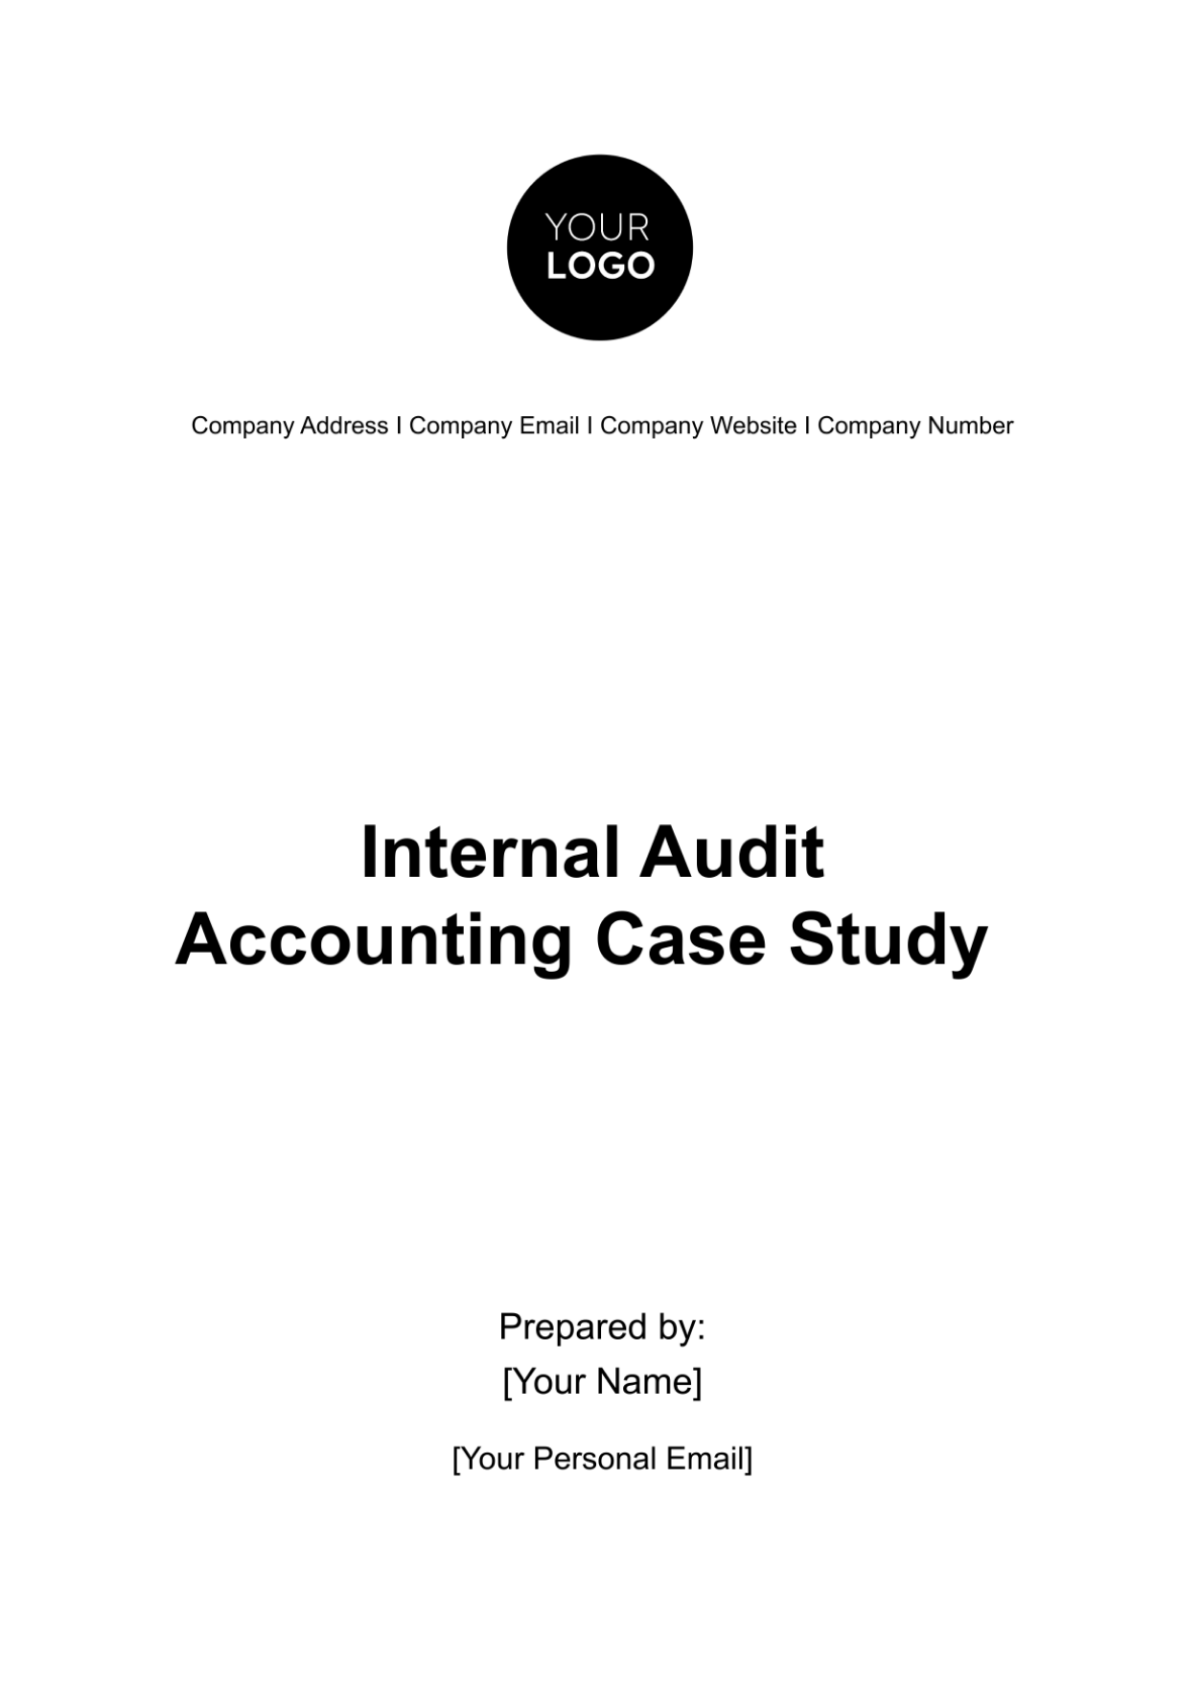 Internal Audit Accounting Case Study Template